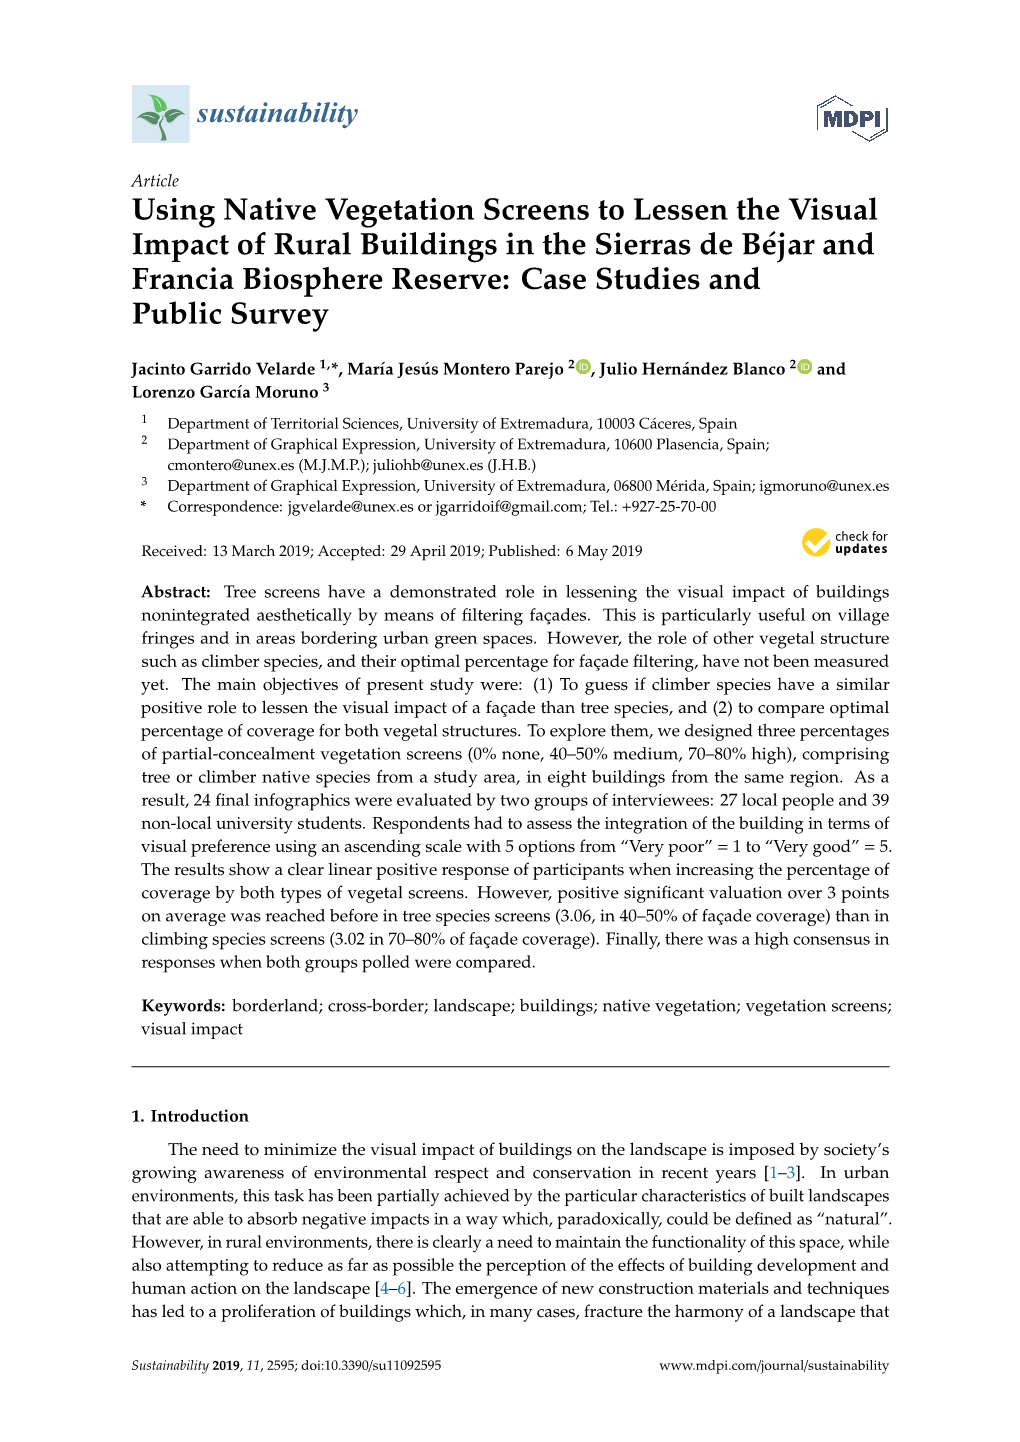 Using Native Vegetation Screens to Lessen the Visual Impact of Rural Buildings in the Sierras De Béjar and Francia Biosphere Reserve: Case Studies and Public Survey